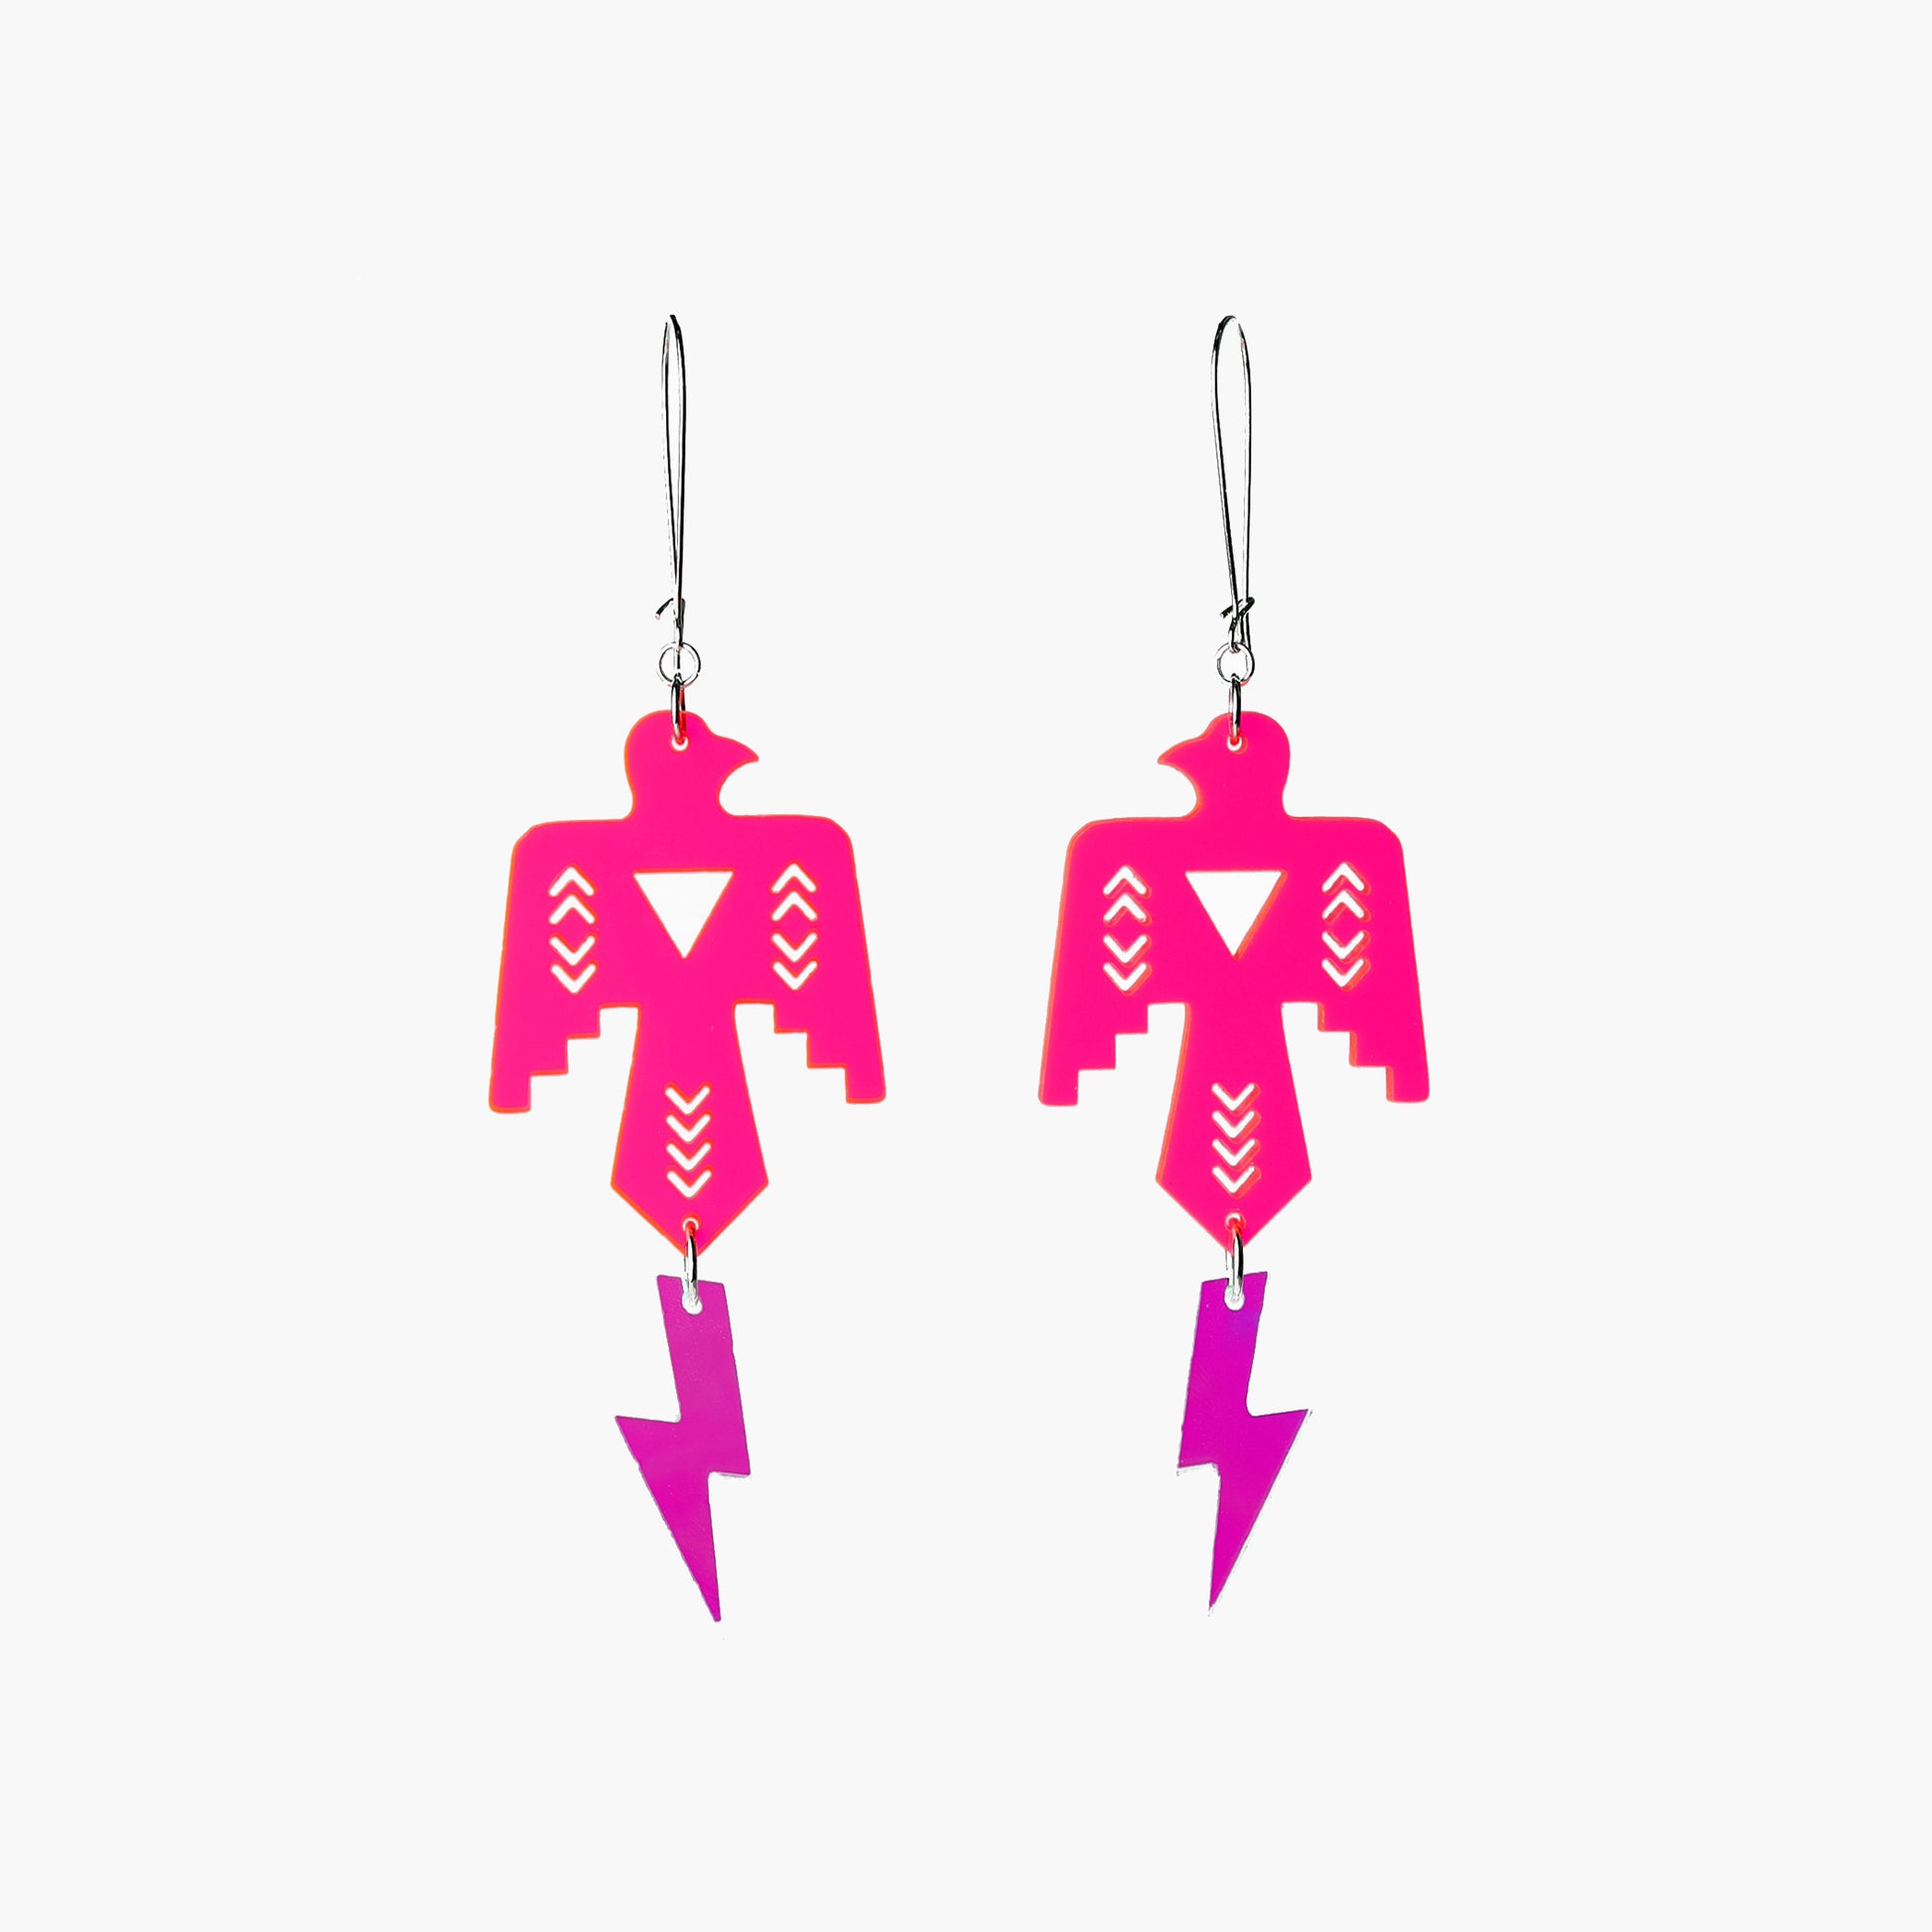 Front view Image of Indi City Thunderbird-themed earrings in neon pink with iridescent lightning bolt accents, representing the revival of indigenous Thunderbeing symbolism within contemporary design.